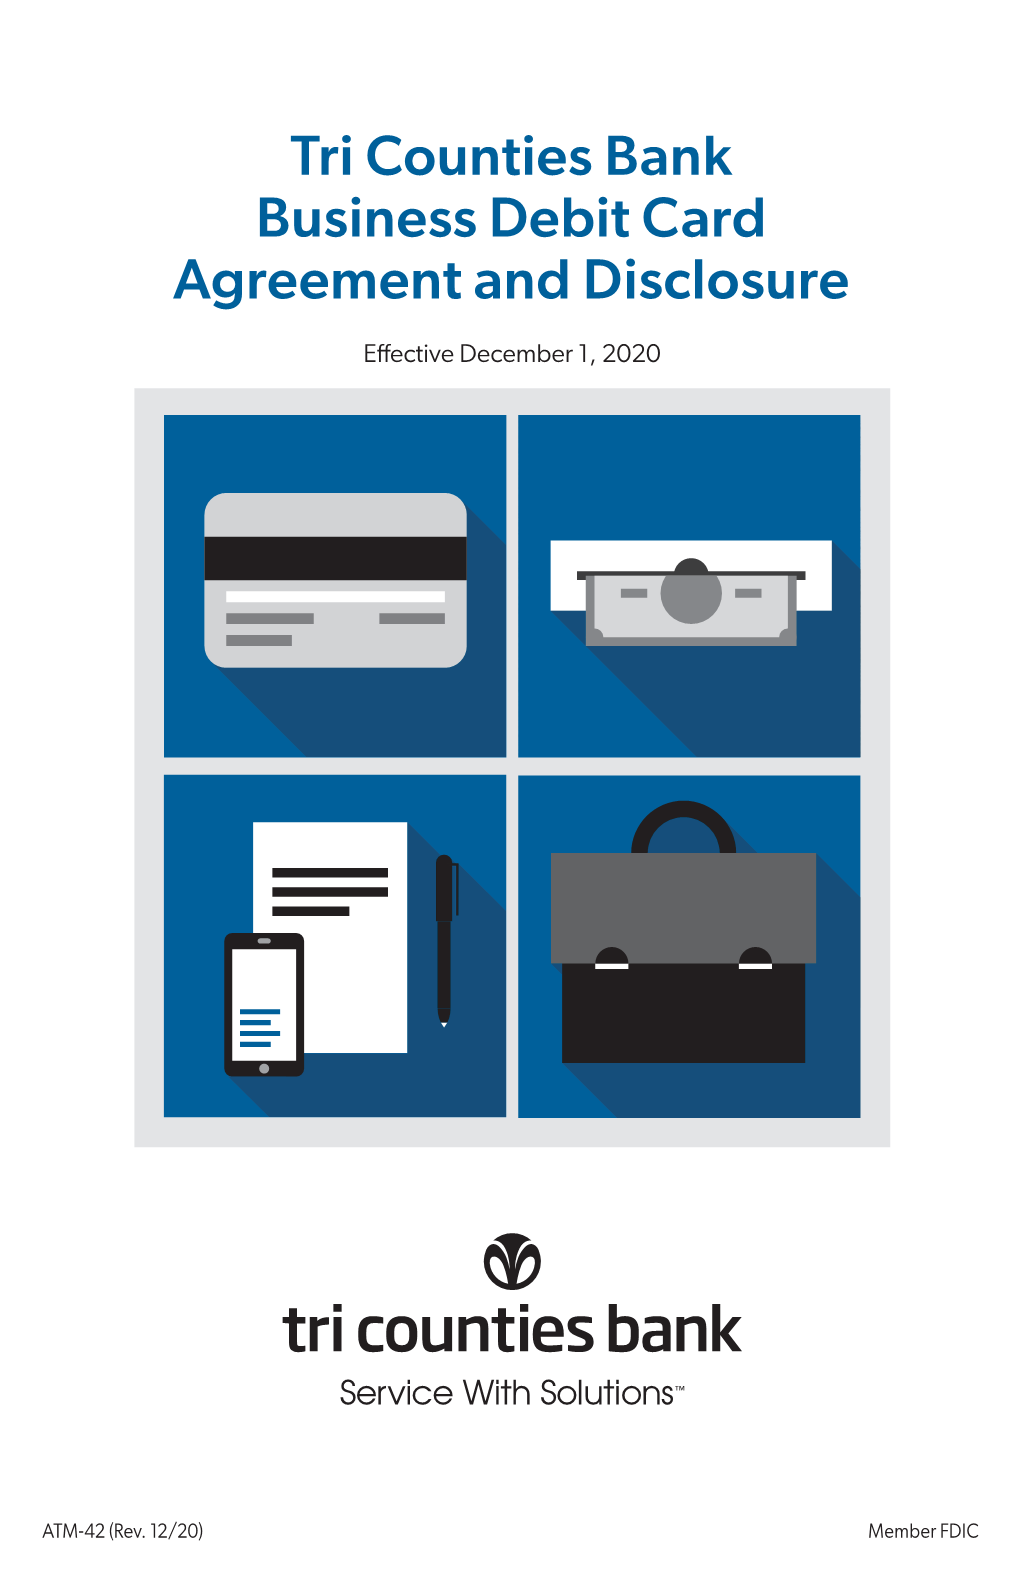 Tri Counties Bank Business Debit Card Agreement and Disclosure